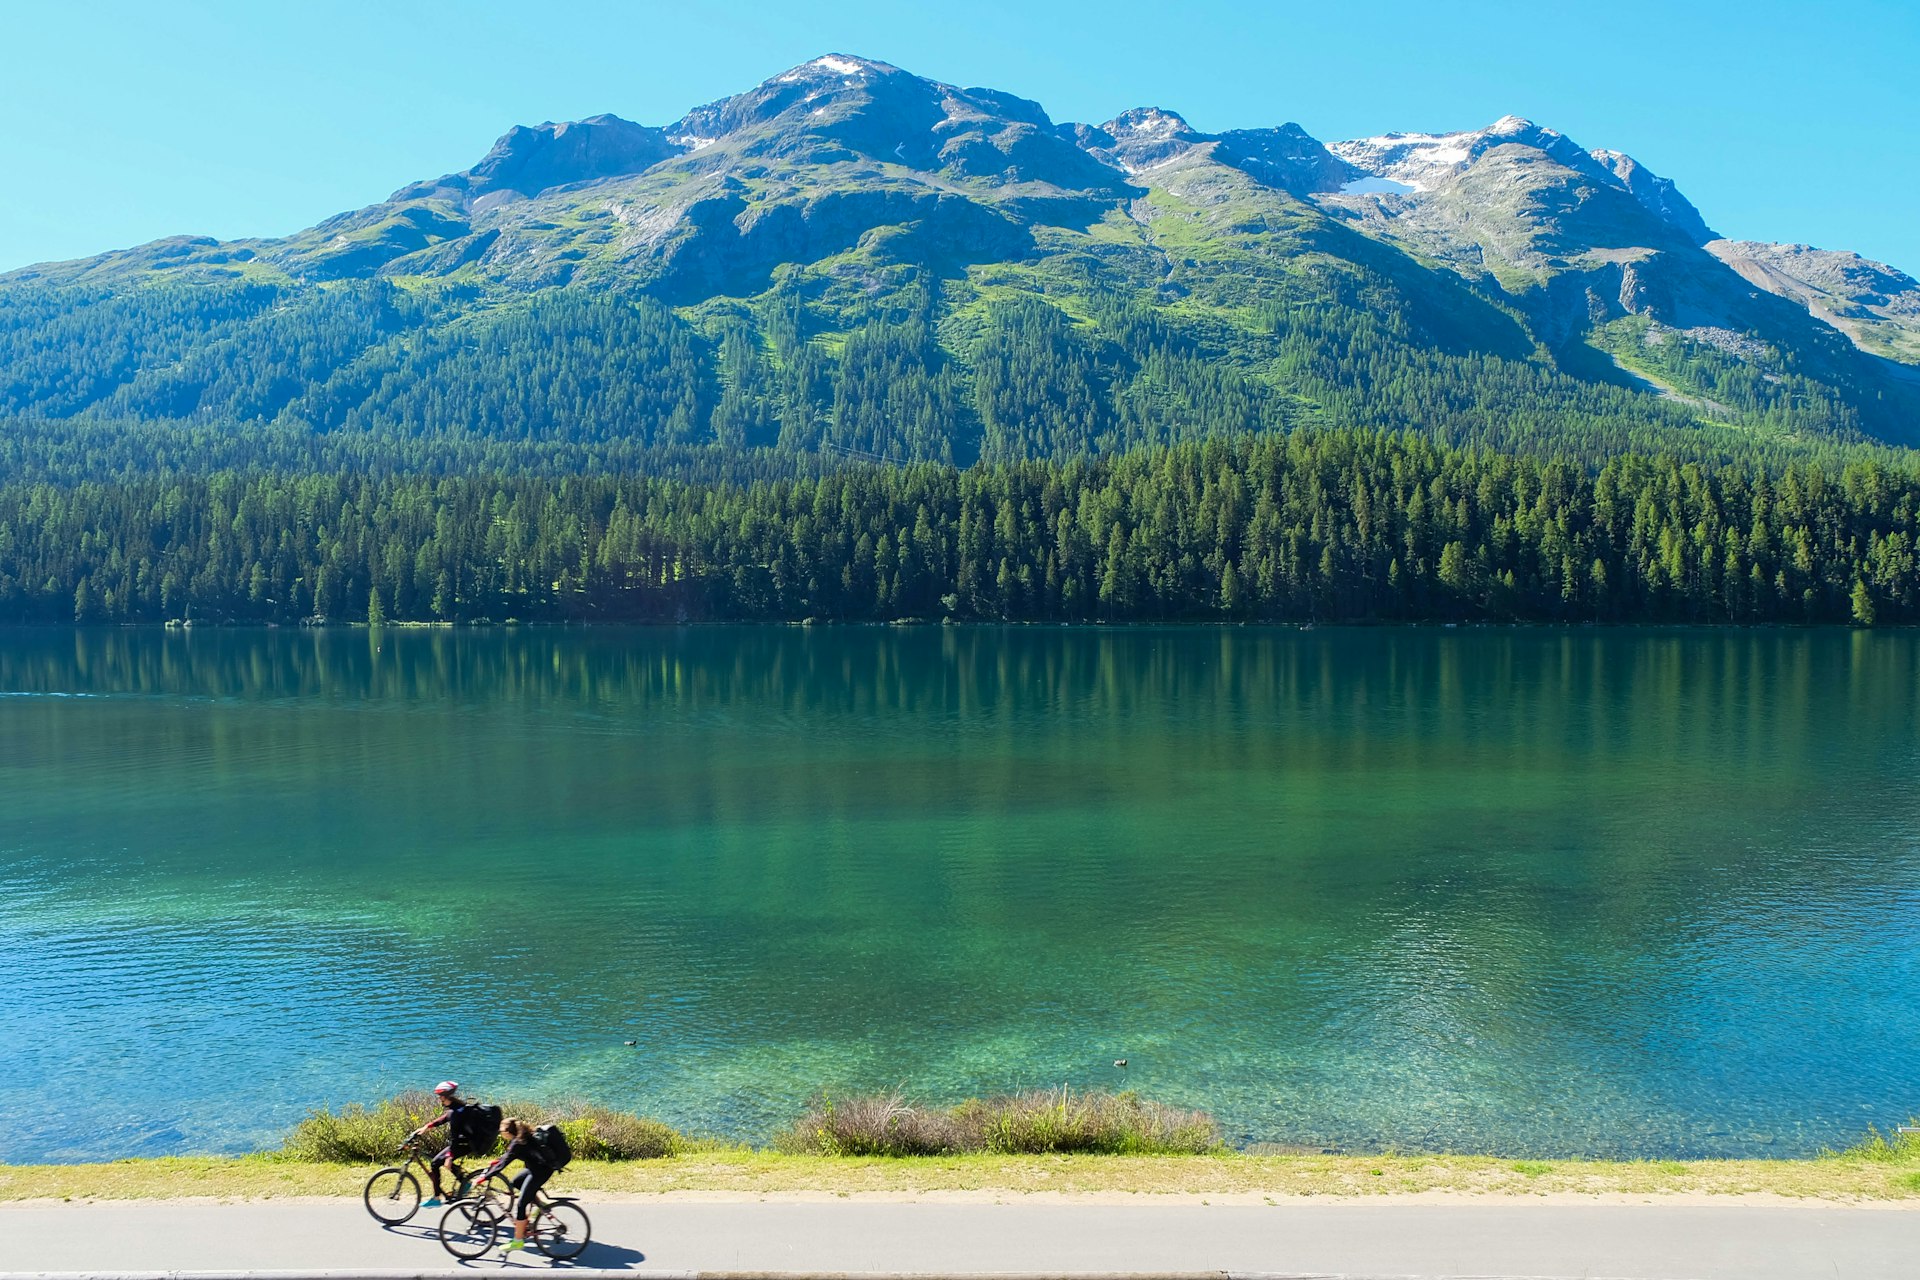 Two cyclists riding alongside a turquoise lake surrounded by mountains